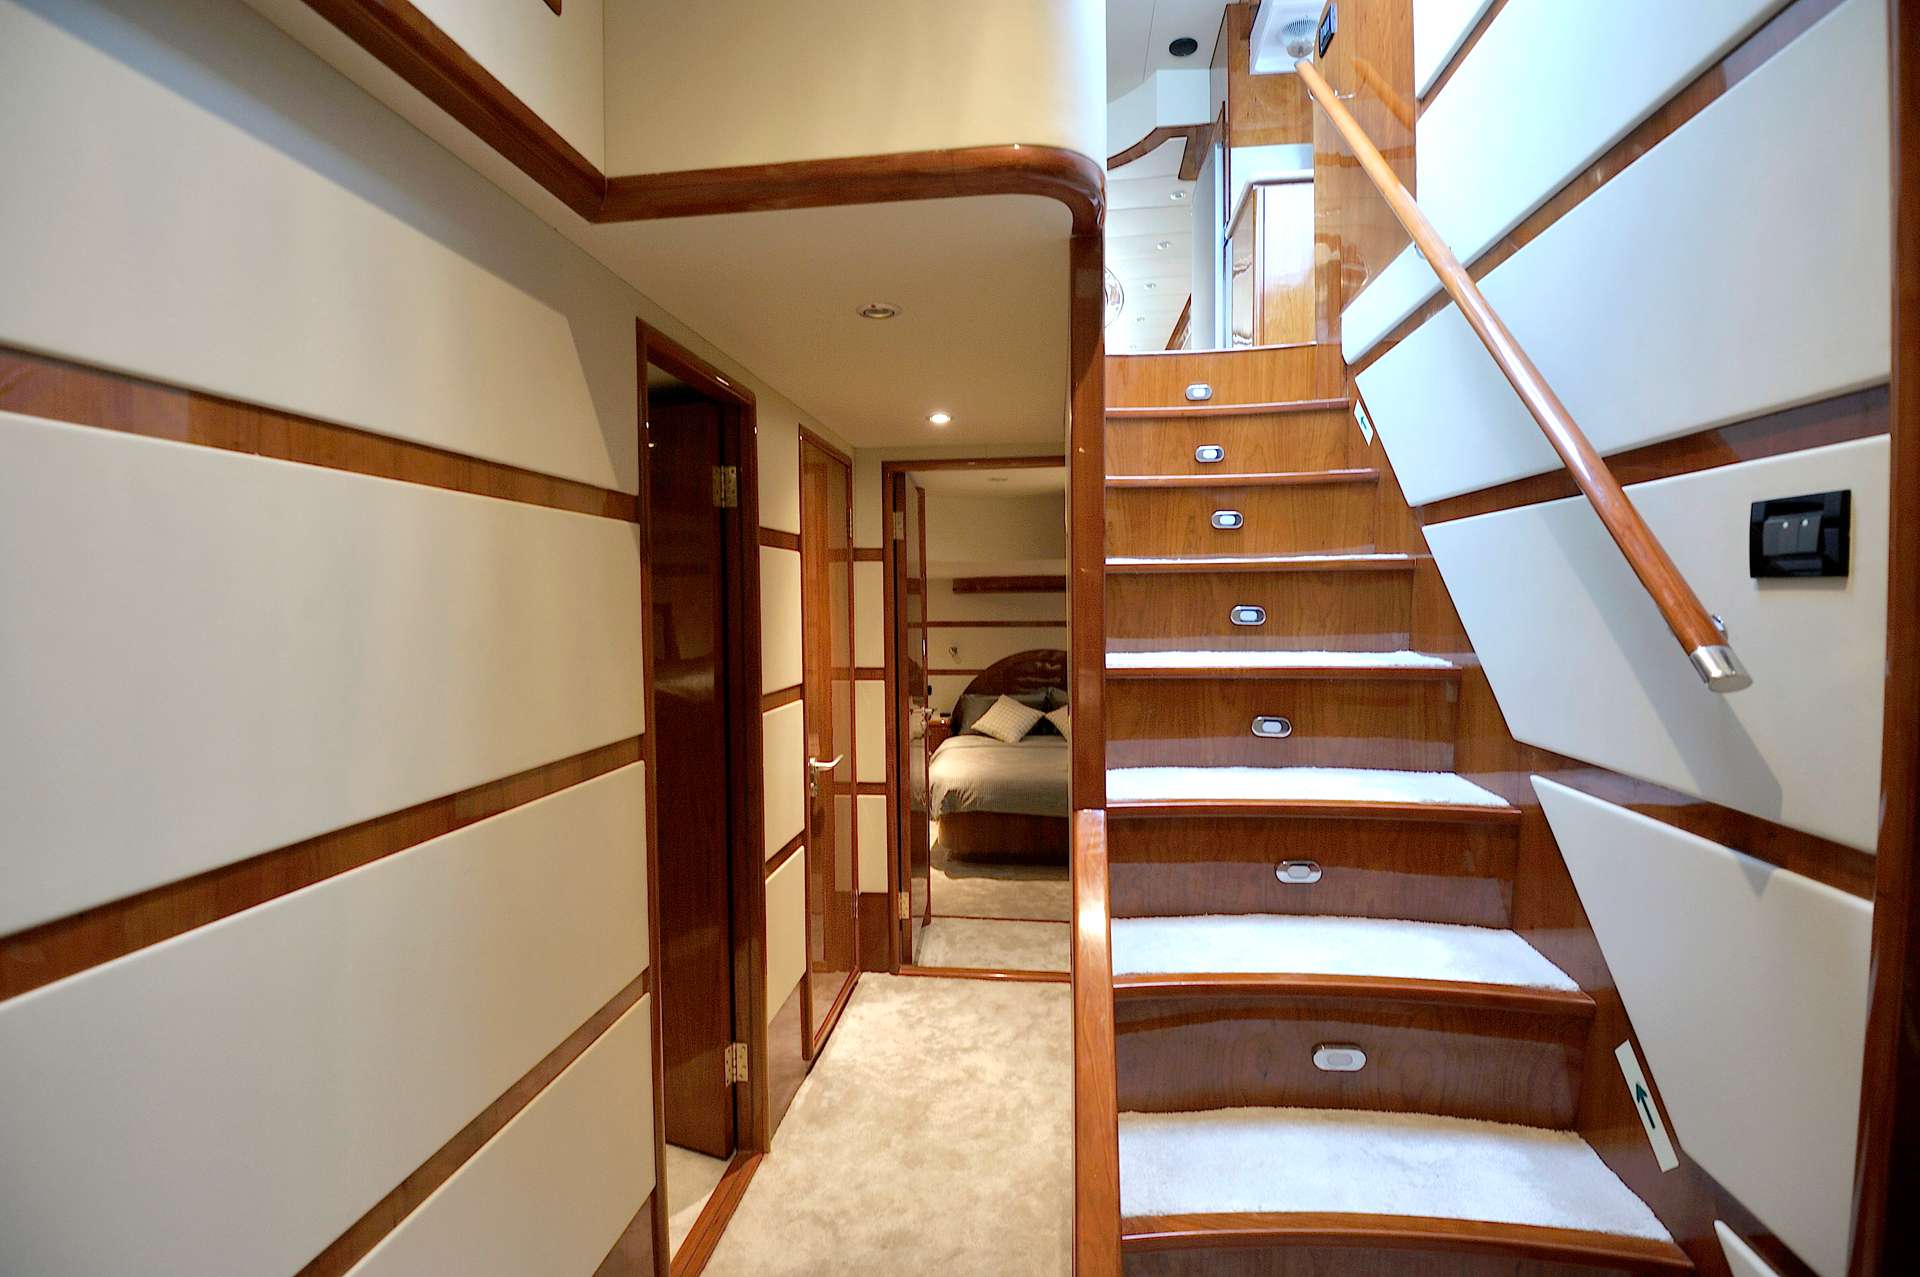 LADY KATHRYN Yacht Charter - from cabin deck  to saloon deck